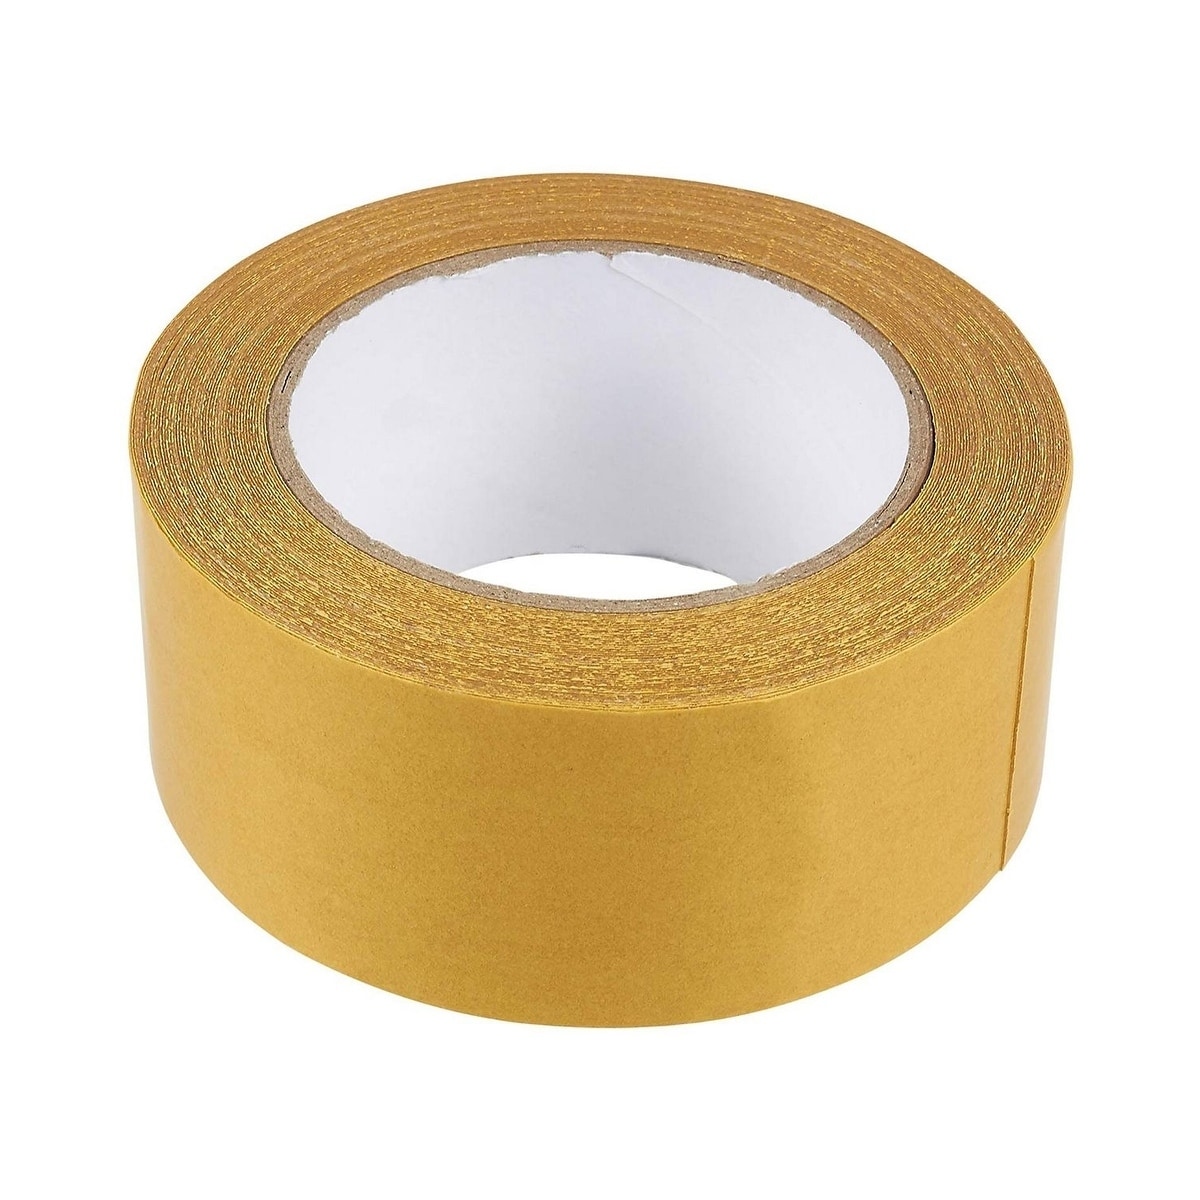 Heavy Duty Double-Sided Tape for Fabric - Anti-Skid Carpet Tape for Area  Rugs